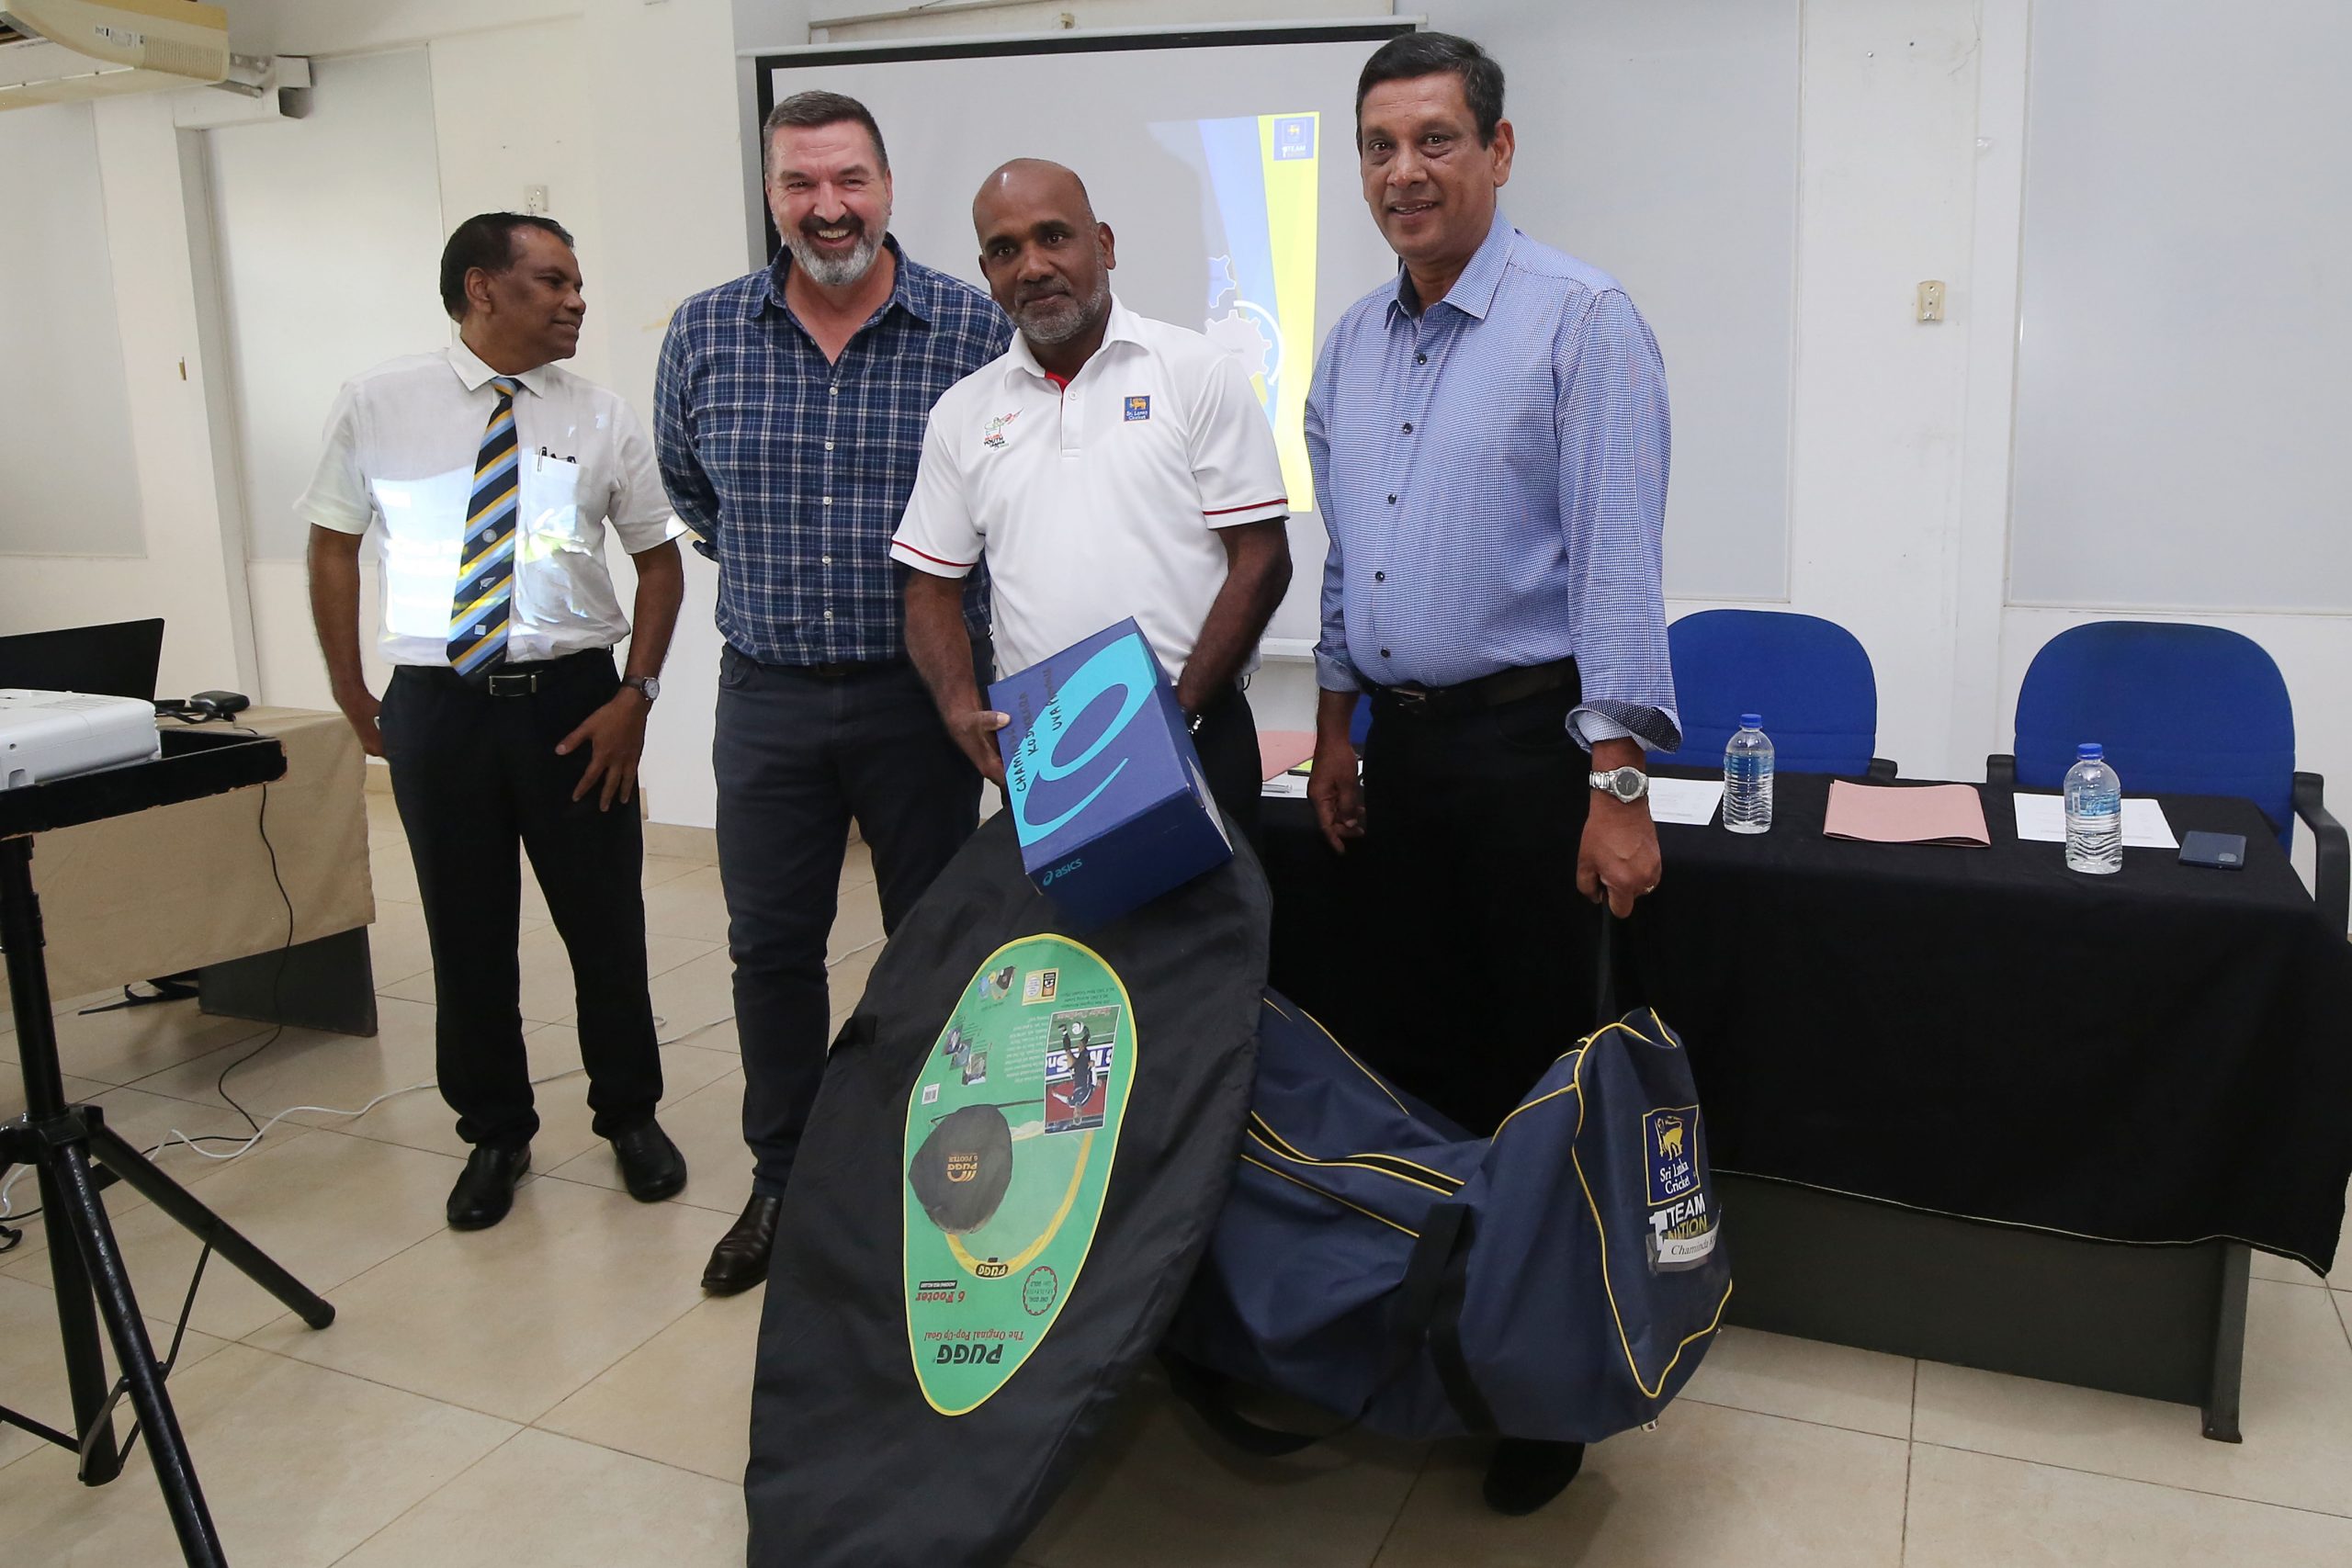 SRI LANKA CRICKET PROVIDES ‘TRAINING KITS’ FOR 51 DISTRICT AND PROVINCIAL COACHES